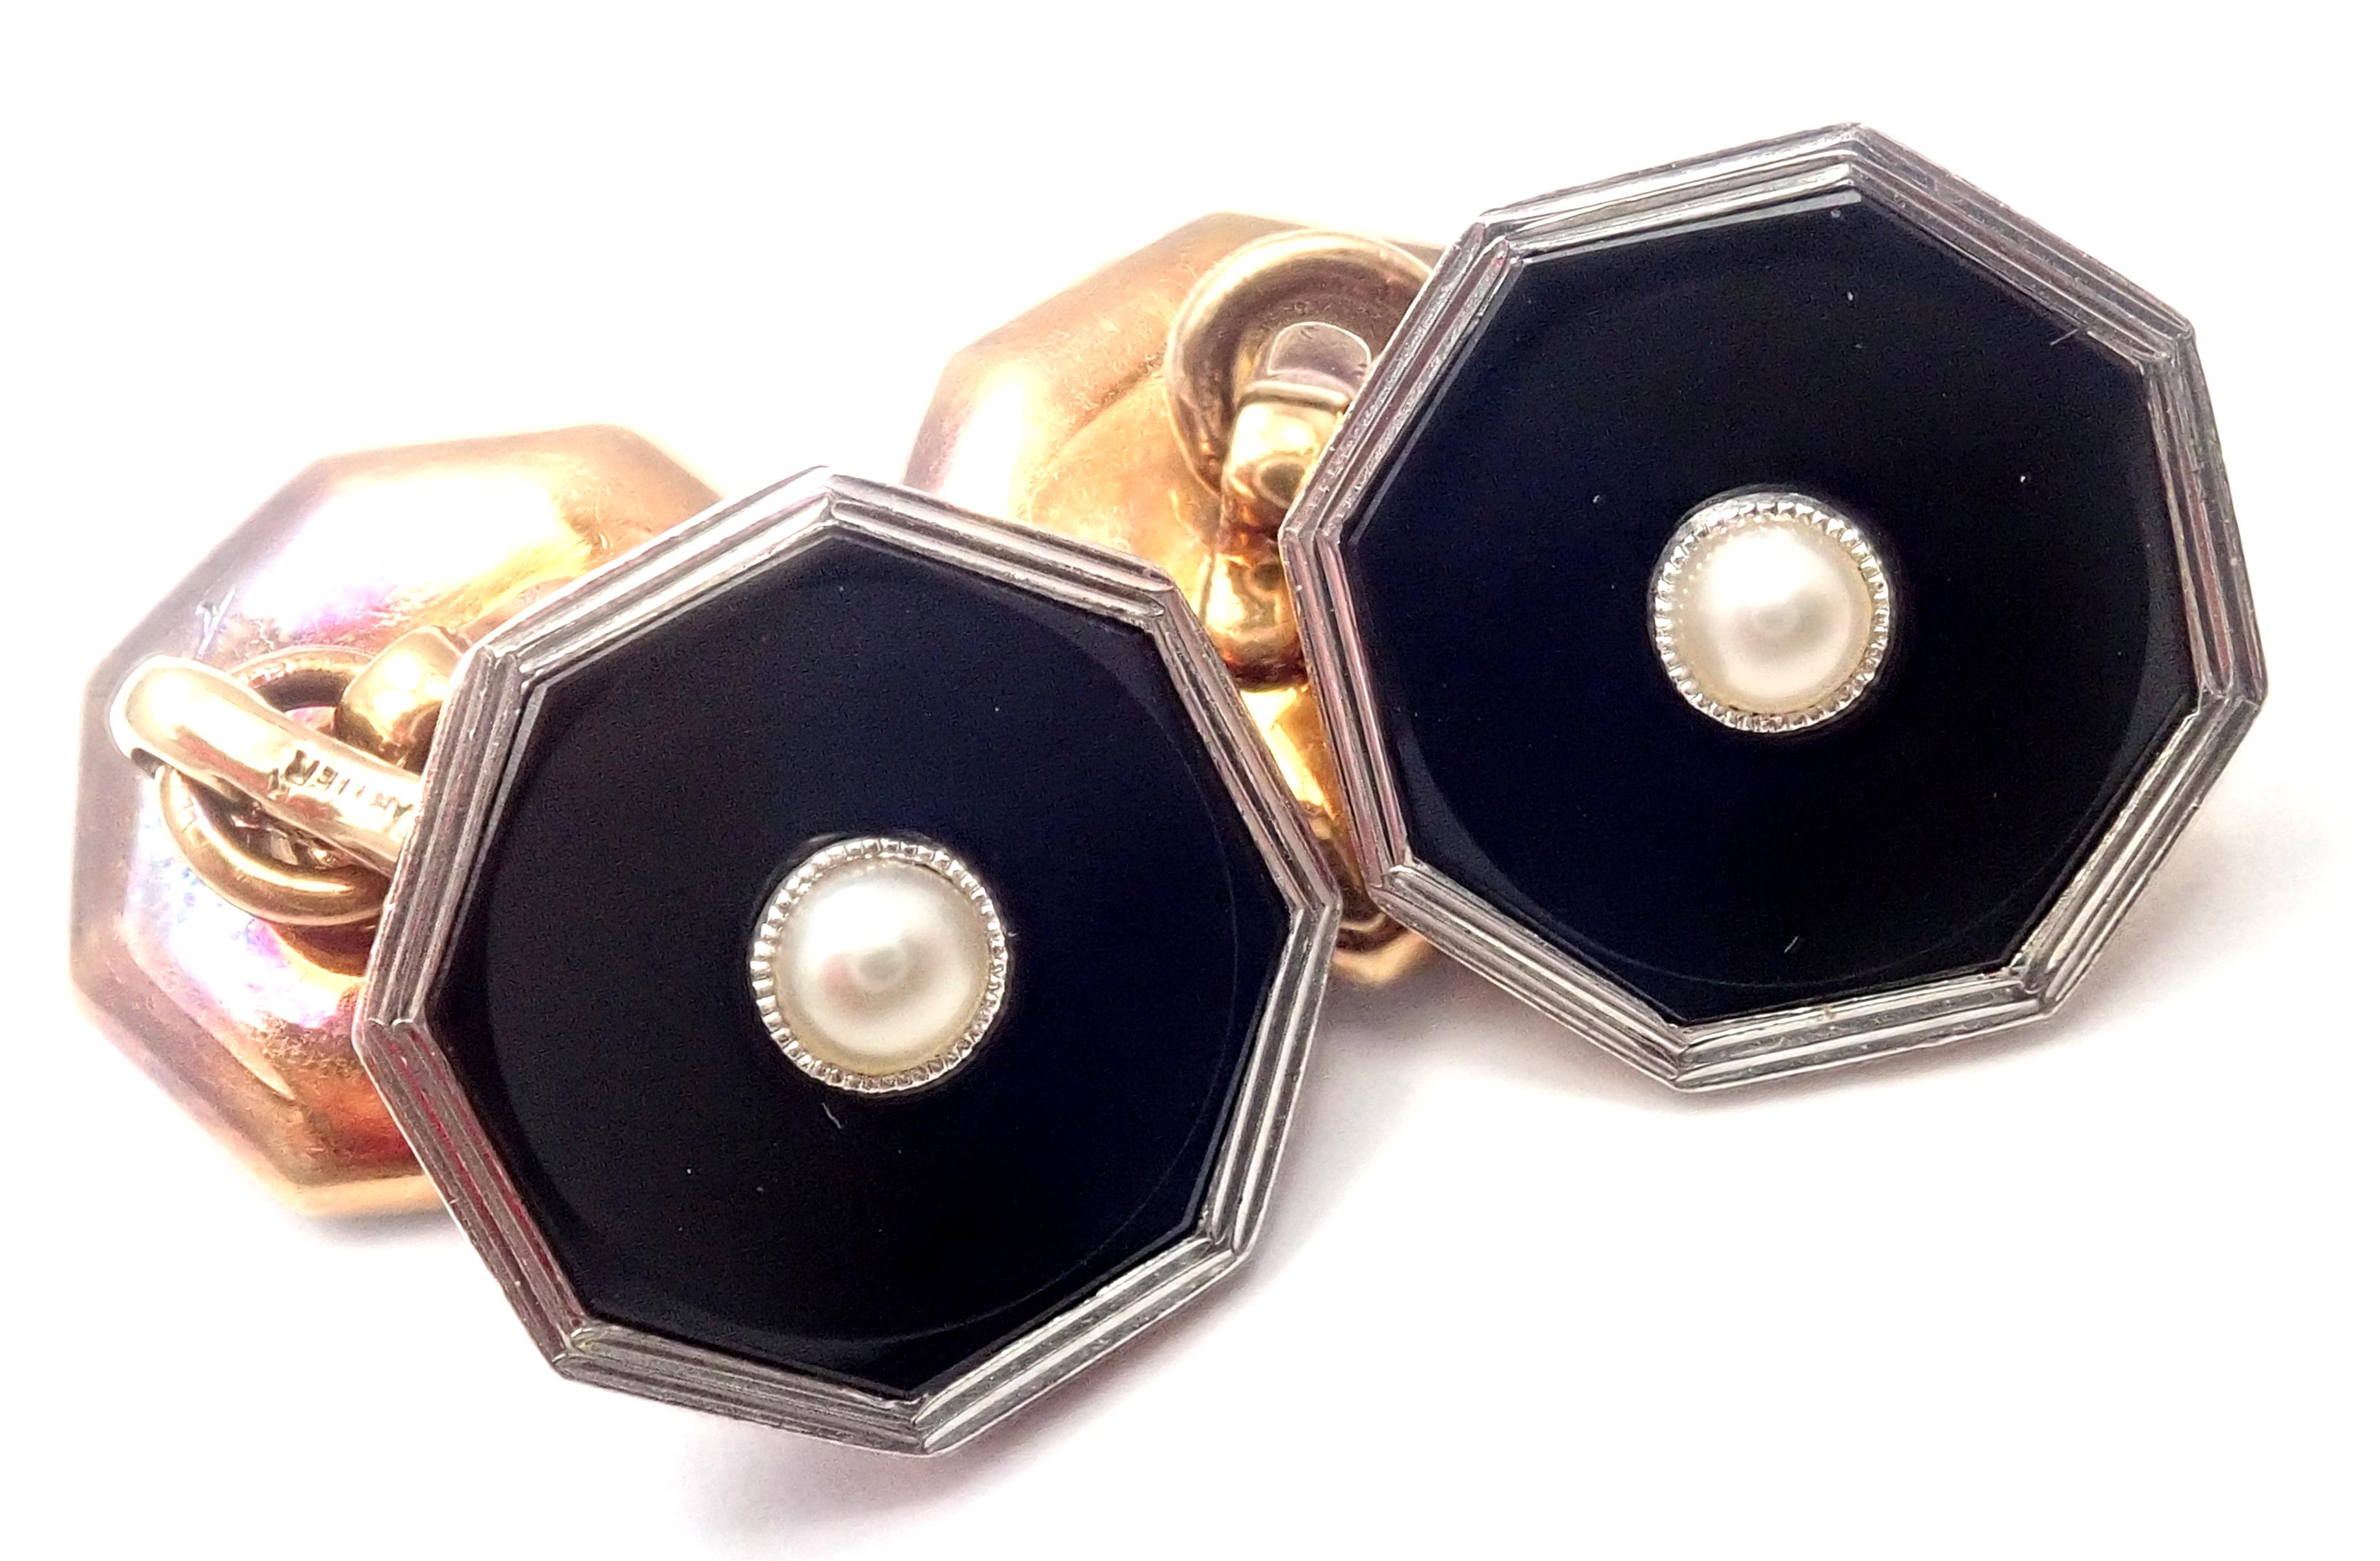 Platinum And 14k Yellow Gold Onyx Seed Pearl Vintage Cufflinks by Cartier. 
With Onyx
4 seed pearls 4mm each
Details: 
Measurements: 14mm x 25mm
Weight: 7.3 grams
Stamped Hallmarks: Cartier Plat&Gold 14k
*Free Shipping within the United States*
Your